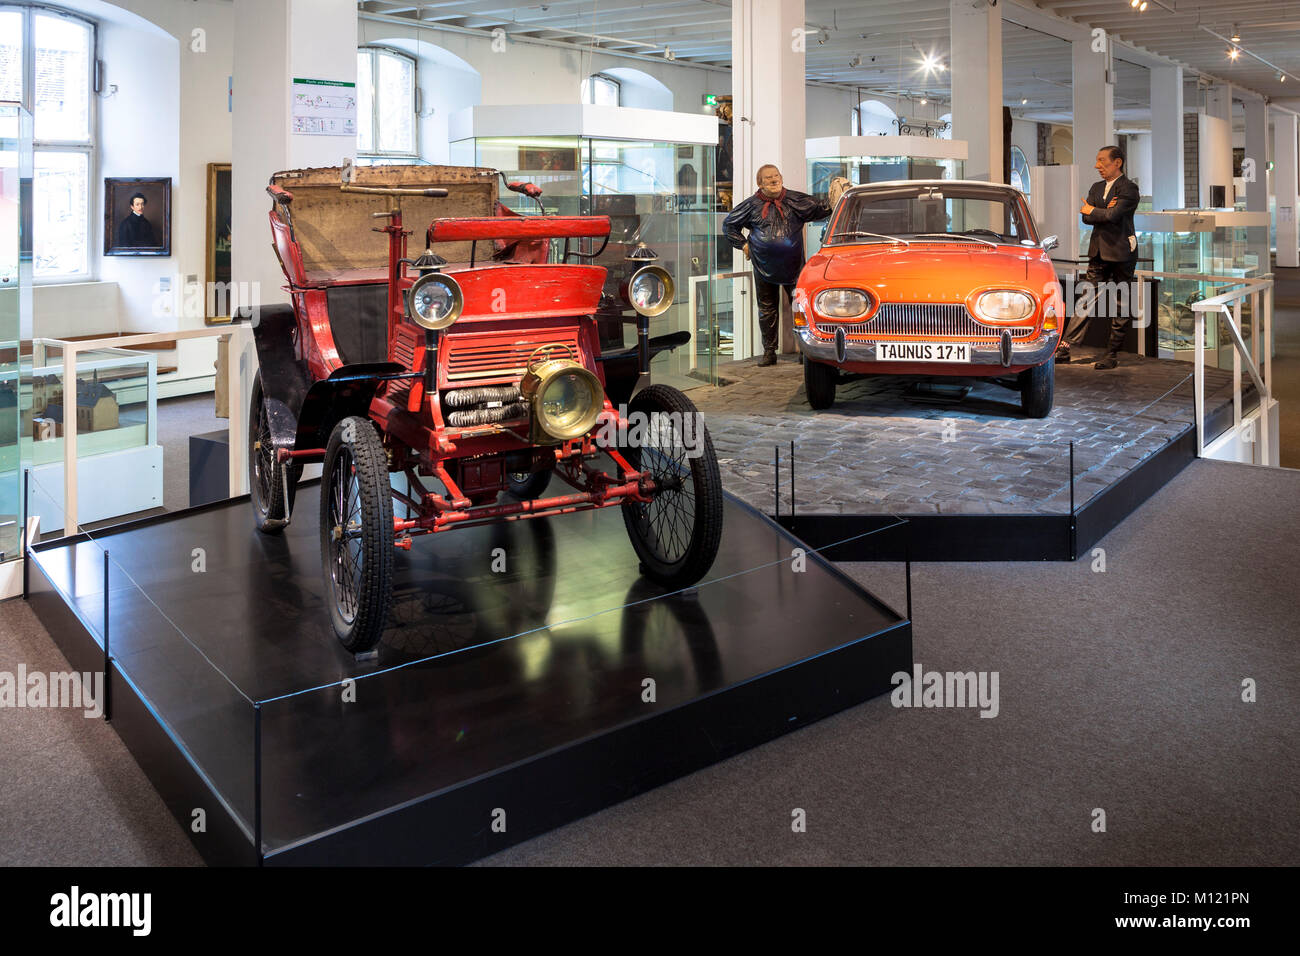 Germany, Cologne, Cologne City Museum, it provides an insight into the history of the city of Cologne, Ford cars with the Cologne figures Tuennes and  Stock Photo